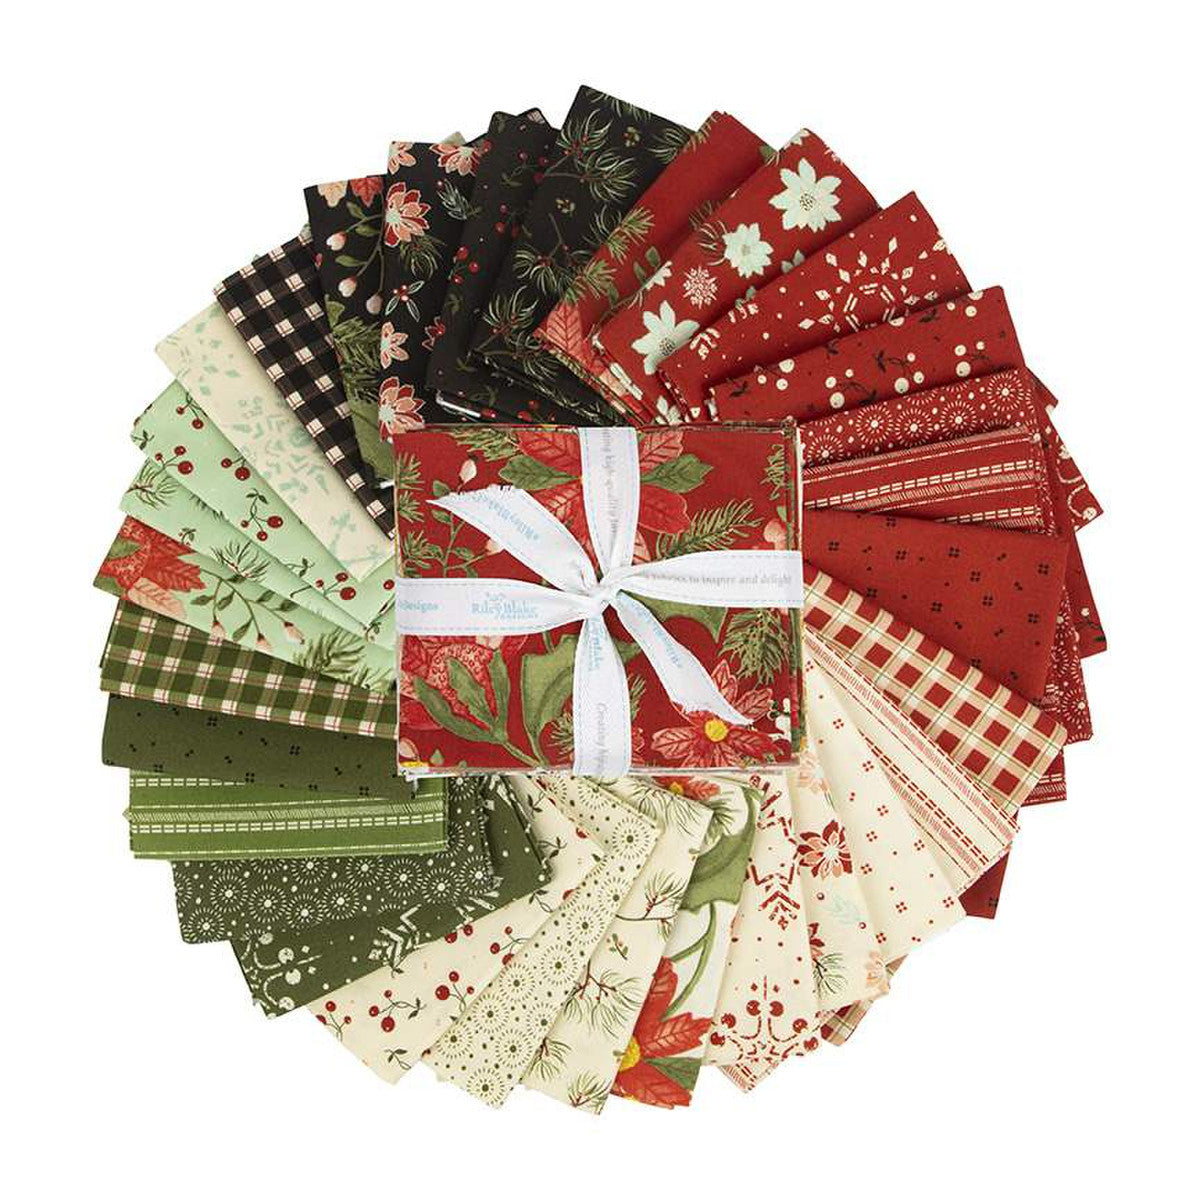 This Fat Quarter precut bundle includes 30 pieces from the Adel in Winter collection by Sandy Gervais for Riley Blake Designs. CH12269-MULTI and C610 Texture basics are not included in the bundle.  100% cotton  Width: 18" x 22"